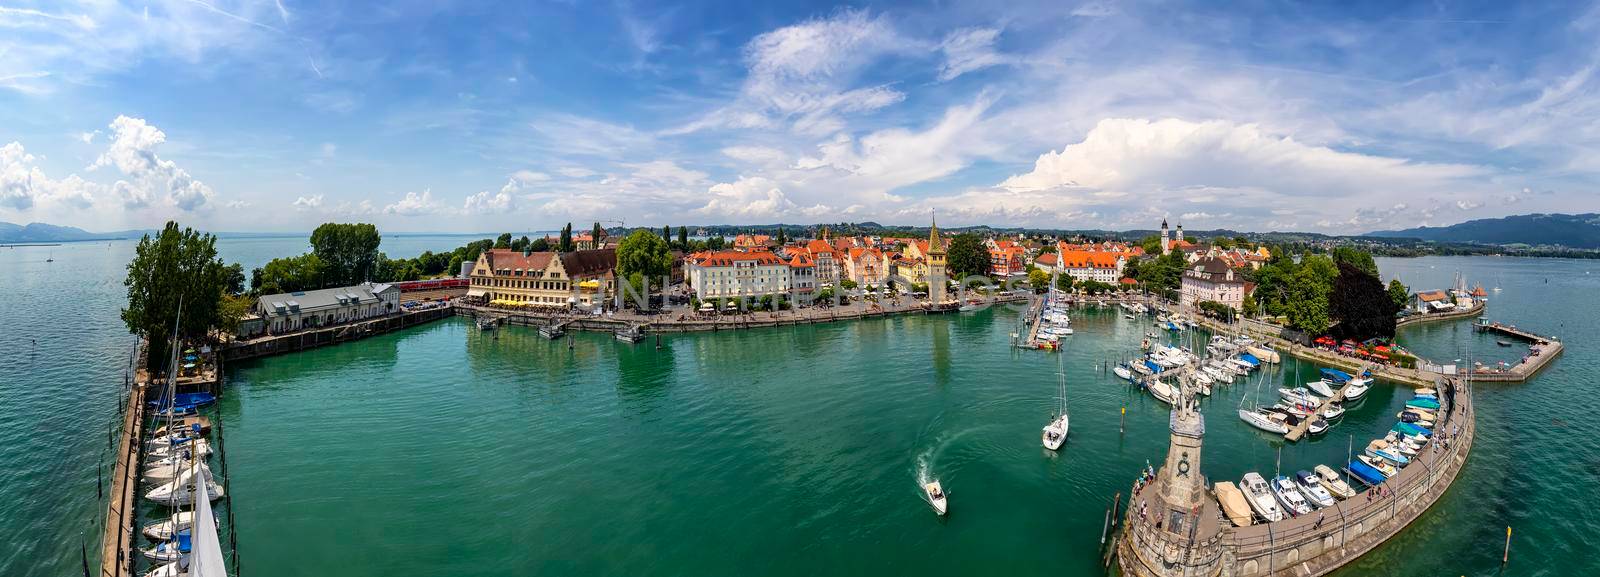 Lindau, Germany - July.21 2019: Amazing panorama of Harbor on Lake Constance with a statue of a lion at the entrance in Lindau, Bavaria, Germany. by EdVal